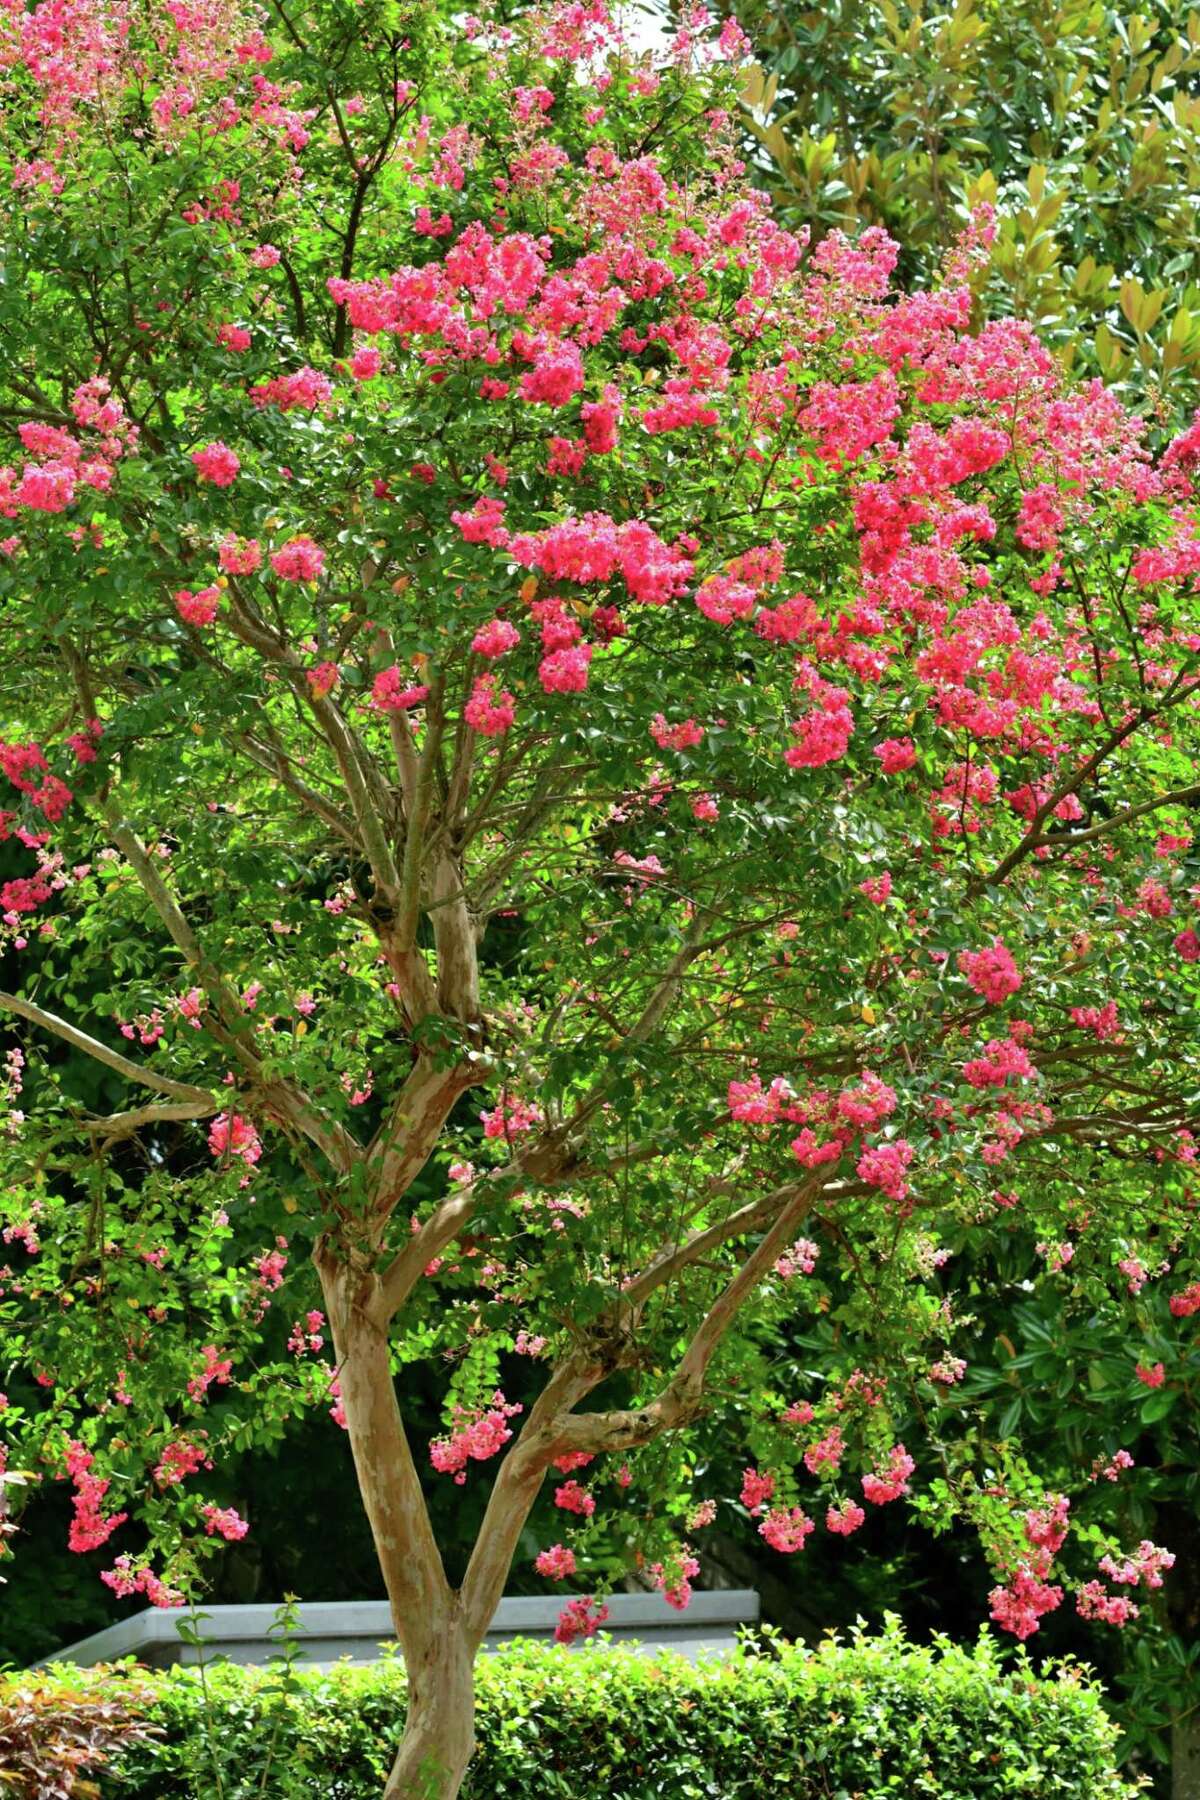 5) Crape Myrtle: Some crape myrtle (also spelled crepe myrtle) trees are taller than 10 feet, but dwarf varieties max out around half that size. Their striking white, pink, or purple flowers don’t mind the heat so it’s a great choice in hot, humid regions. Height at maturity: 5 to 8 feet Varieties to look for: Monow, Monum, Whit III